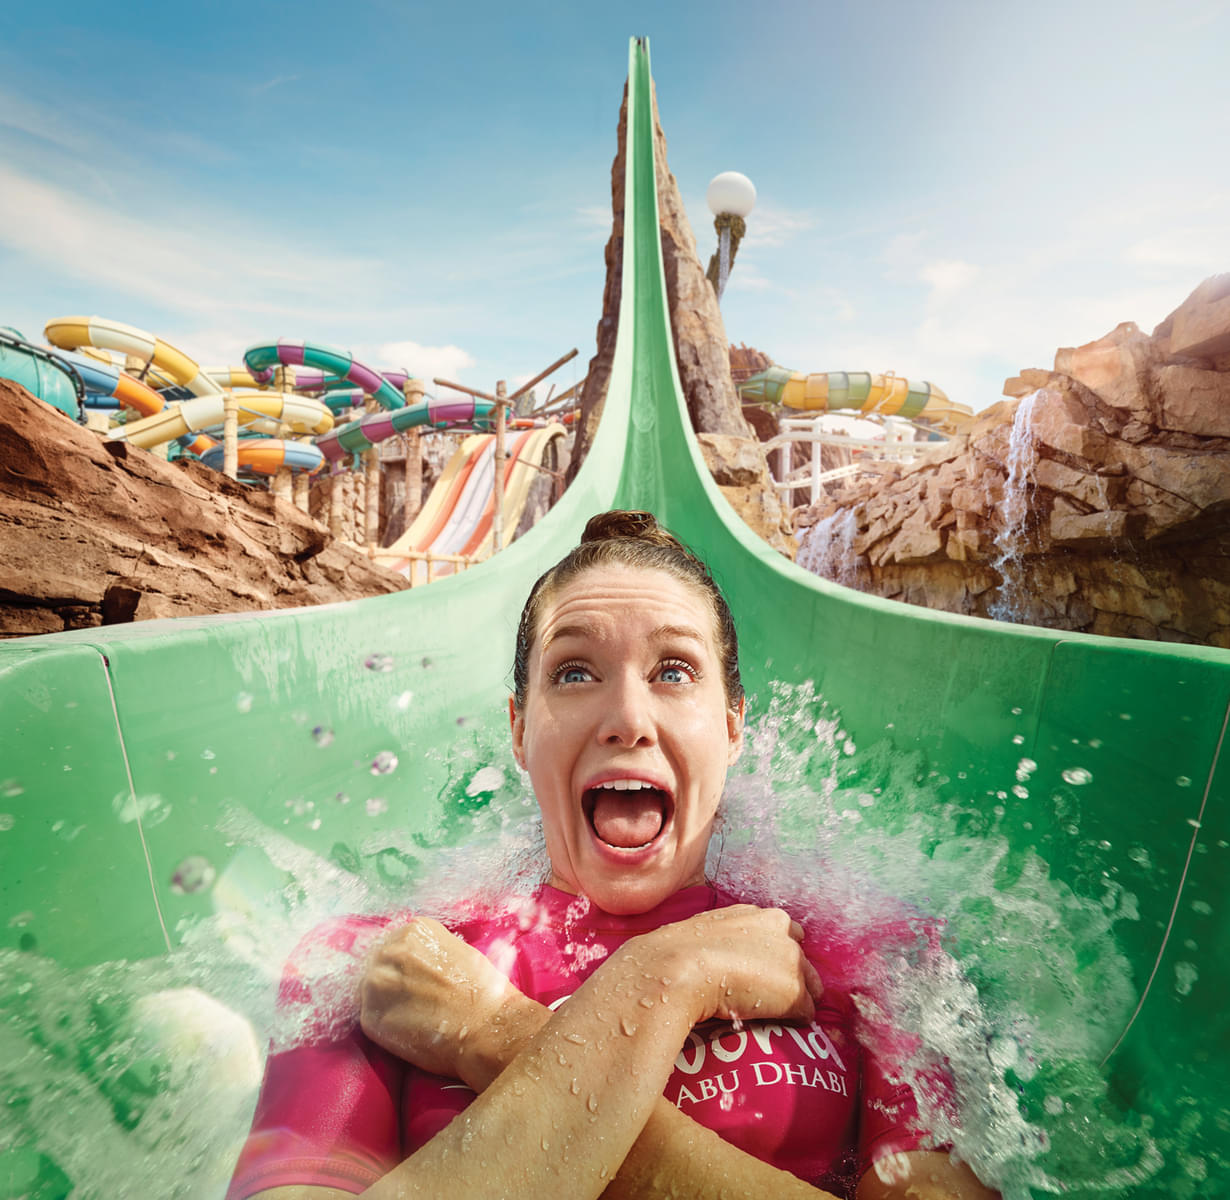 Feel the adraline rush while sliding down from JEBEL DRO water slides at the park